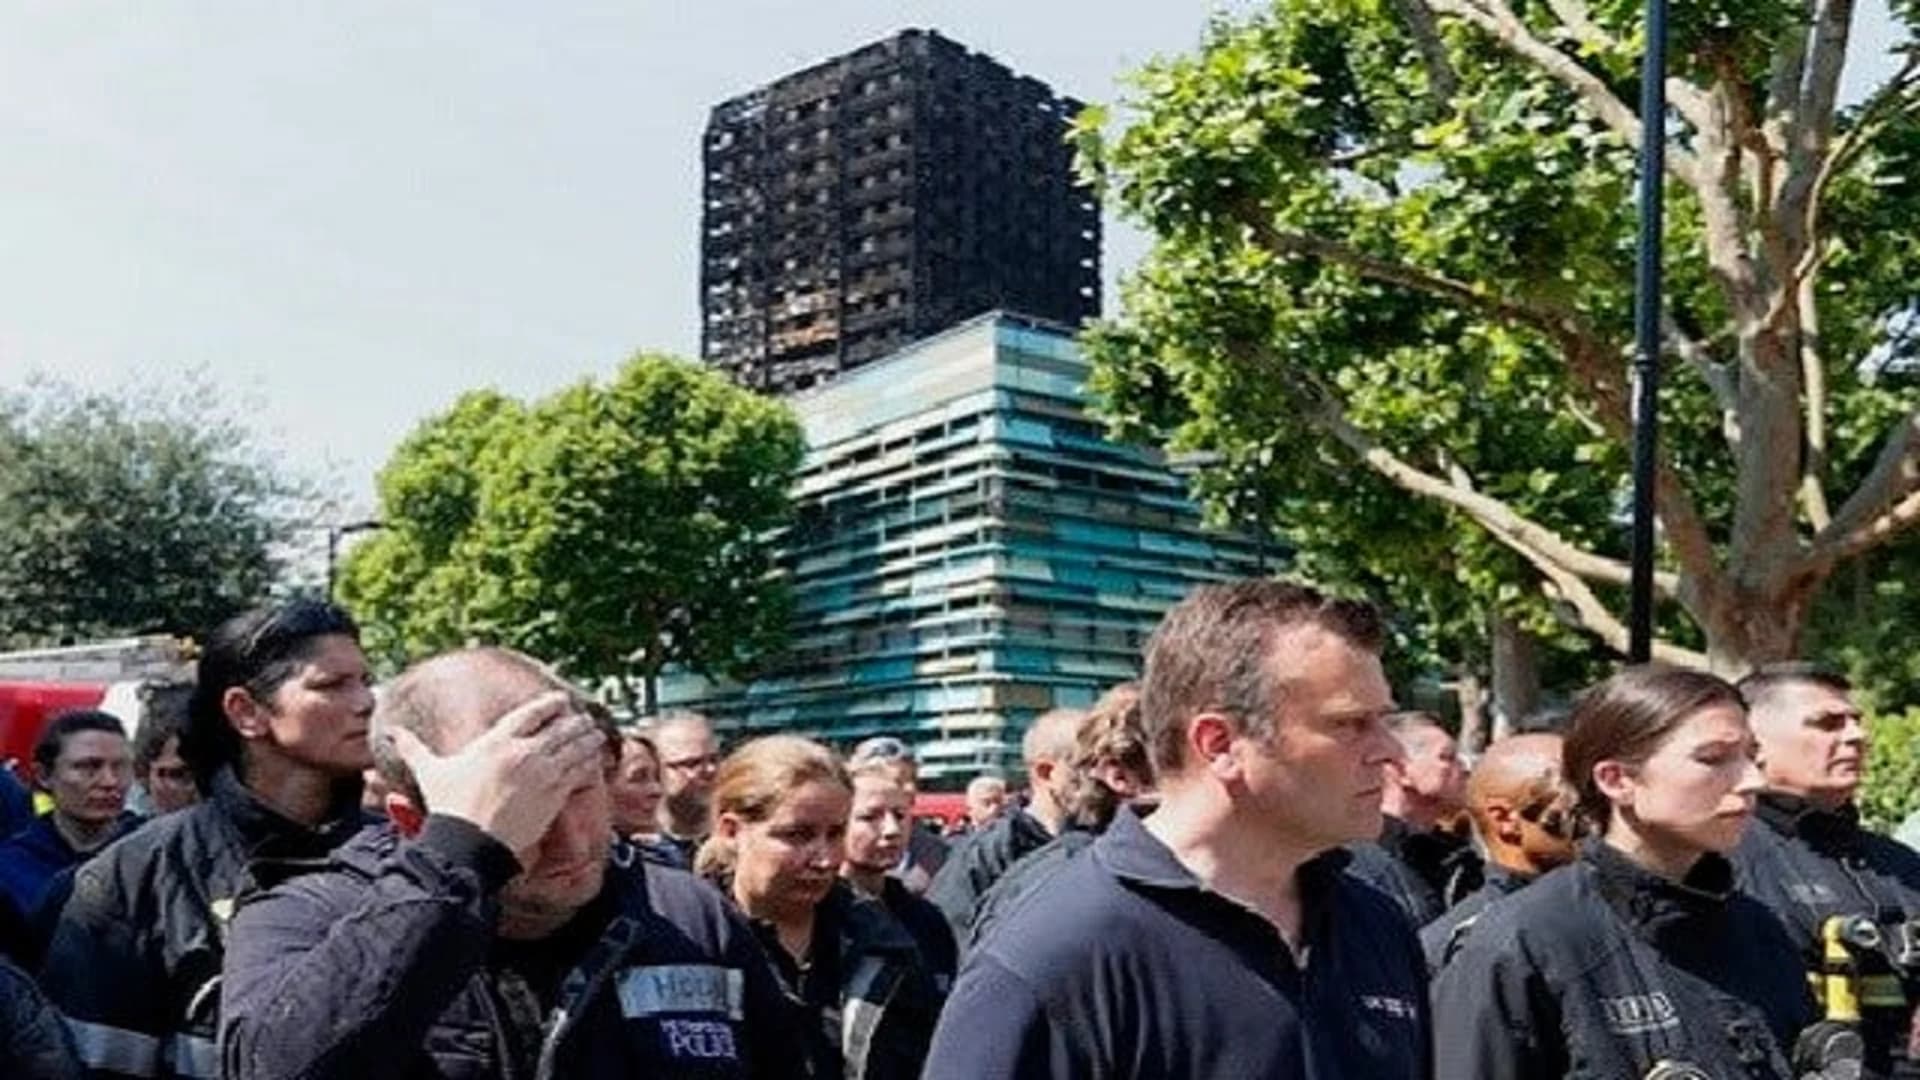 Manslaughter charges eyed in deadly London fire